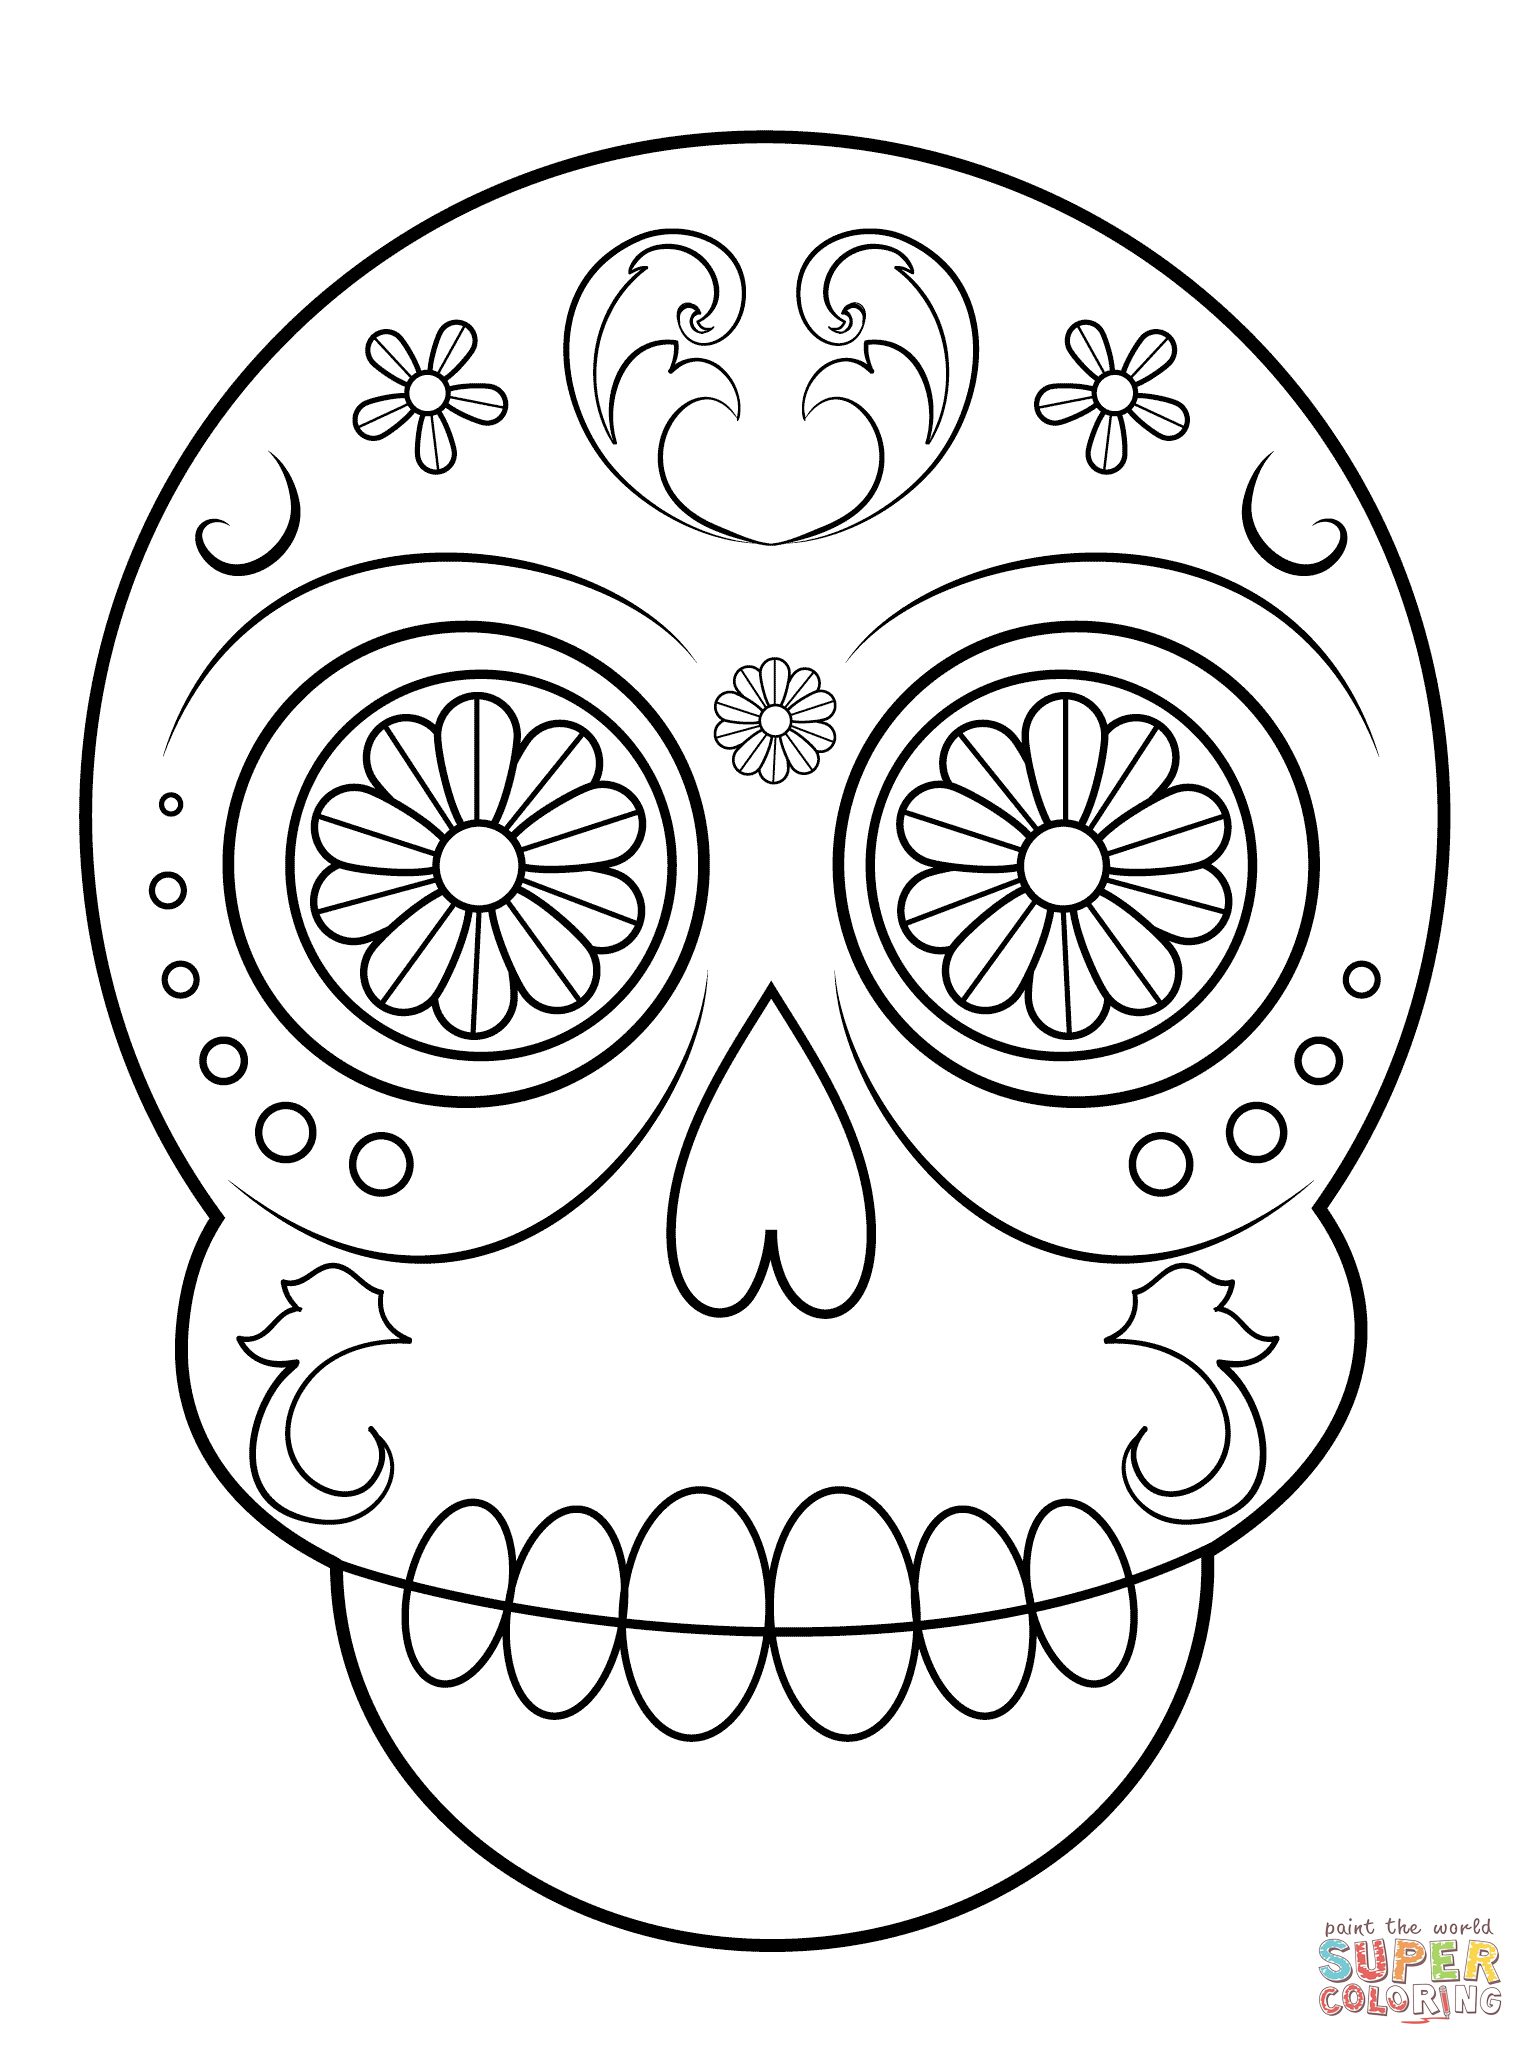 Simple Sugar Skull Coloring Page | Free Printable Coloring Pages - Free Printable Sugar Skull Day Of The Dead Mask